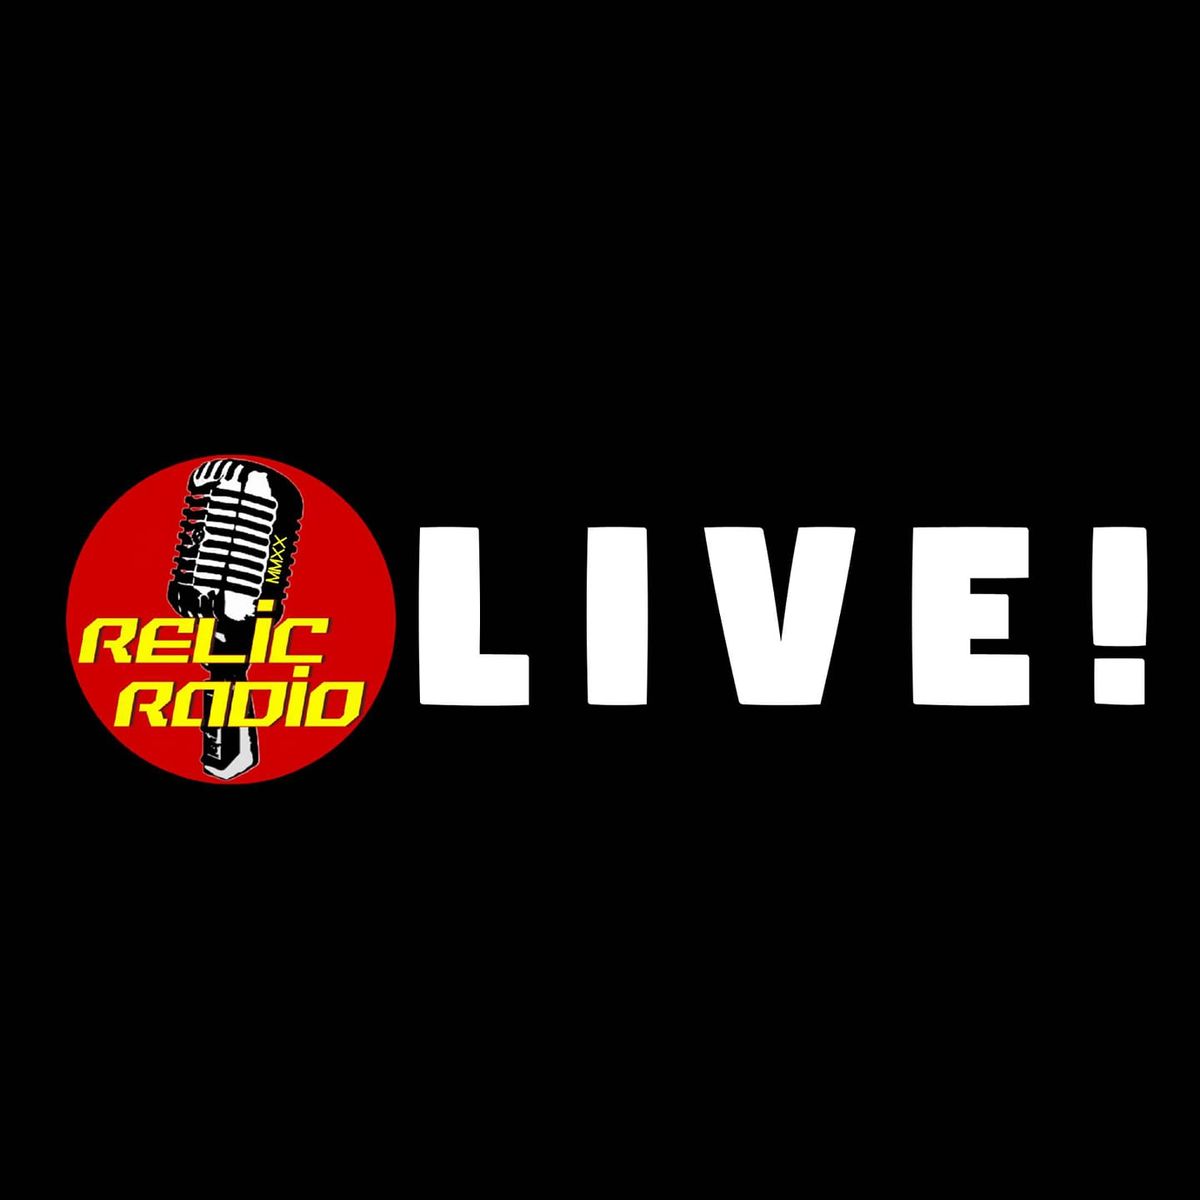 Relic Radio Live! Packing House Brewing Co